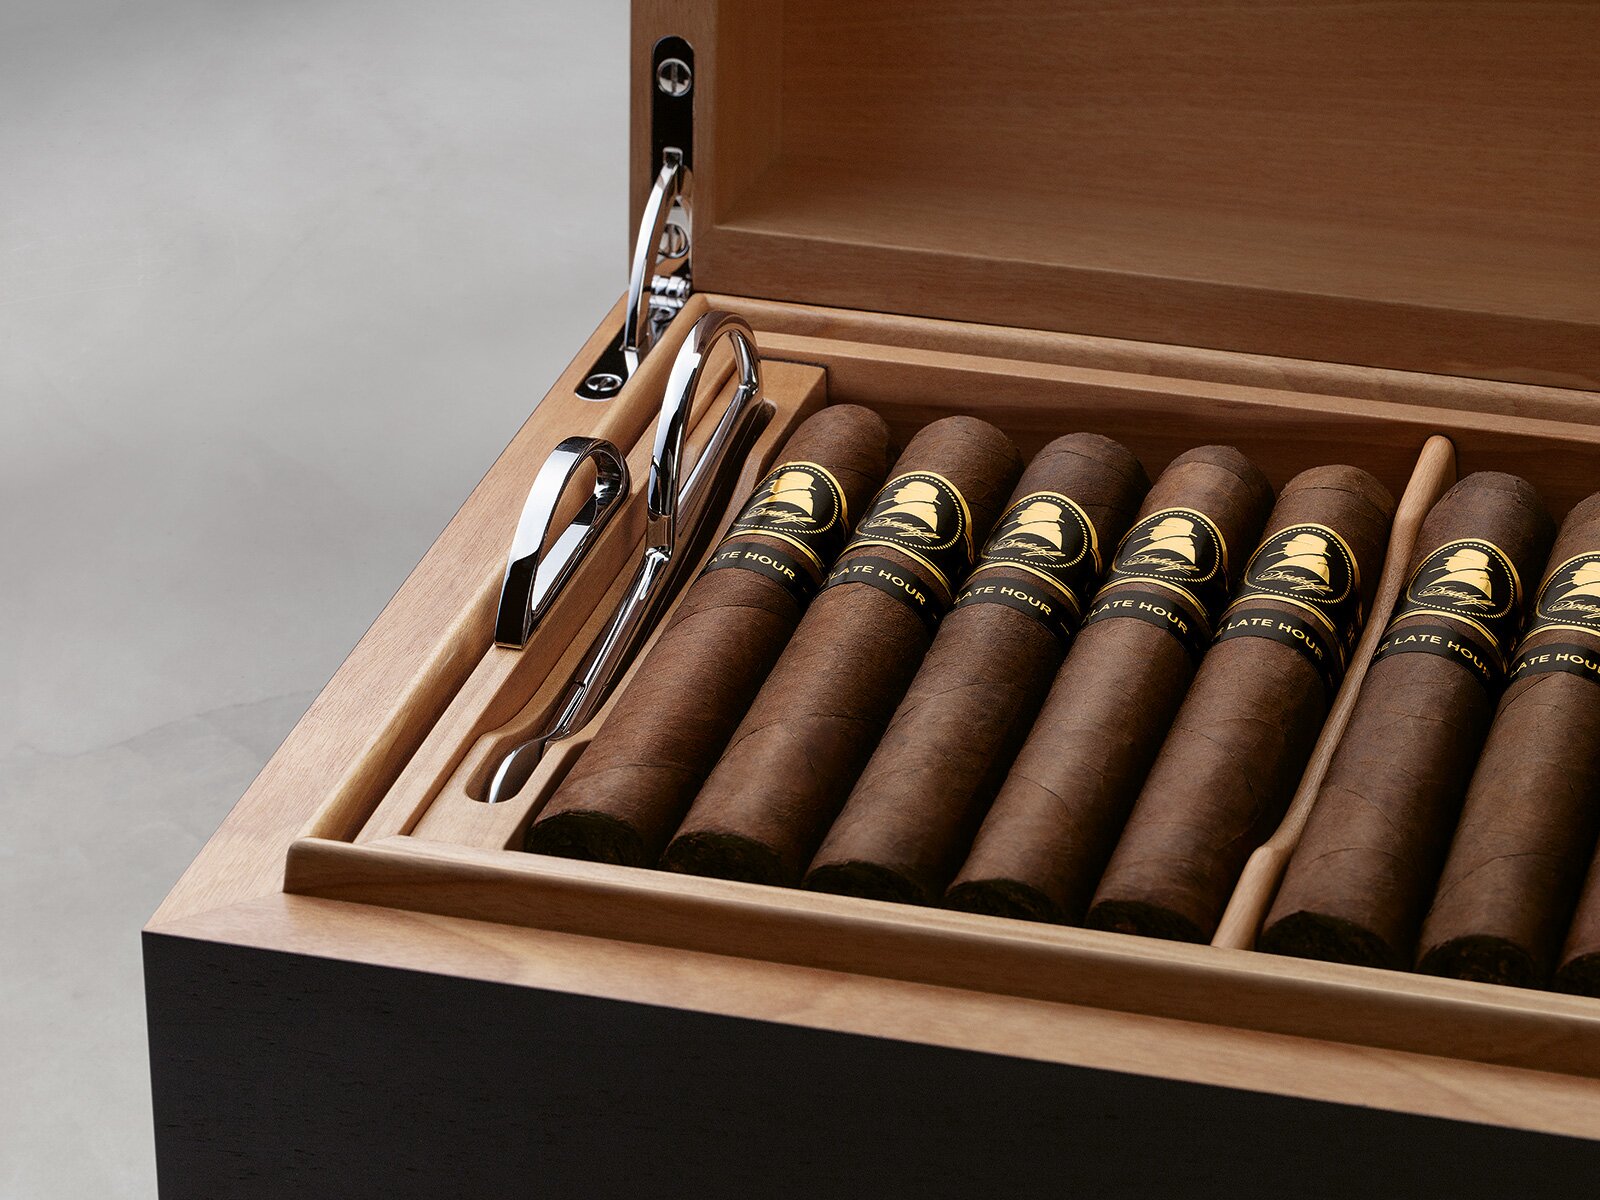 Davidoff Winston Churchill «The Late Hour Series» cigars in an open humidor